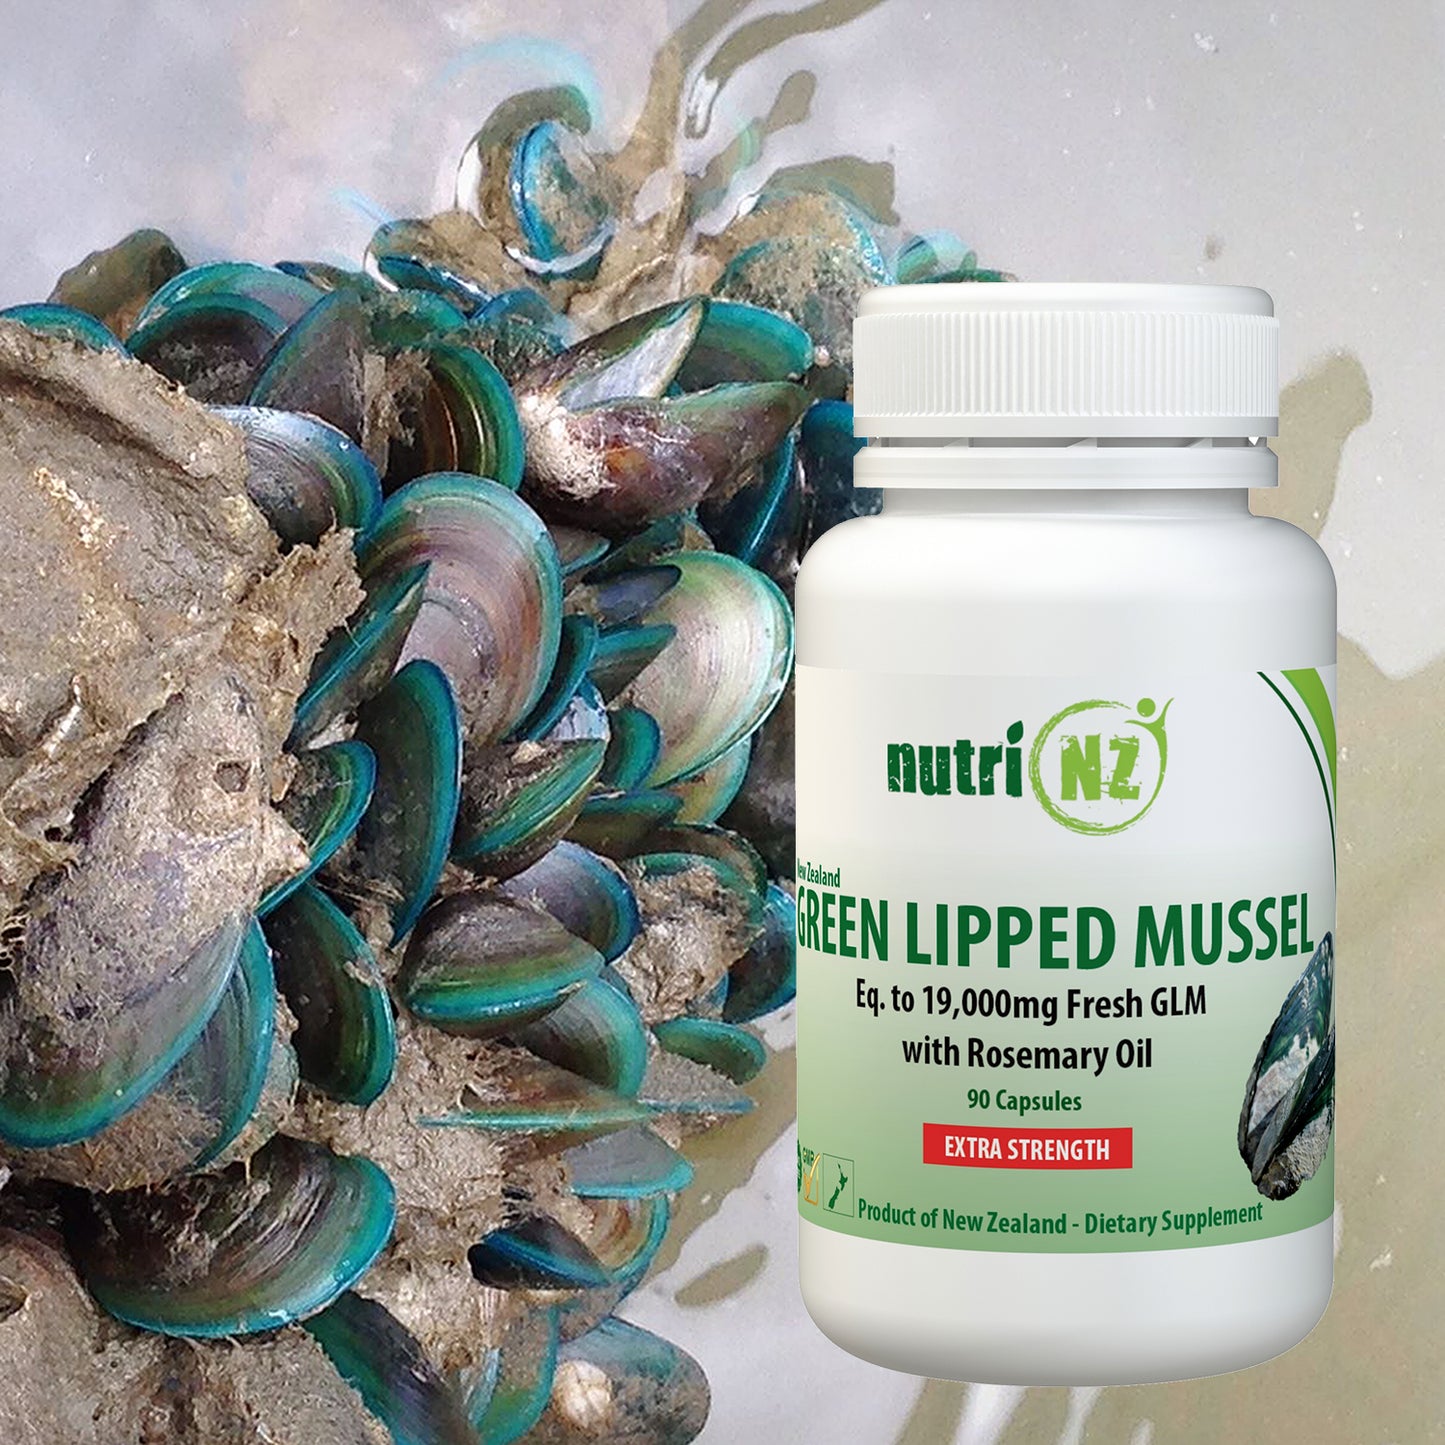 Green Lipped Mussel - 90 Capsules – EXTRA STRENGTH with Rosemary Oil